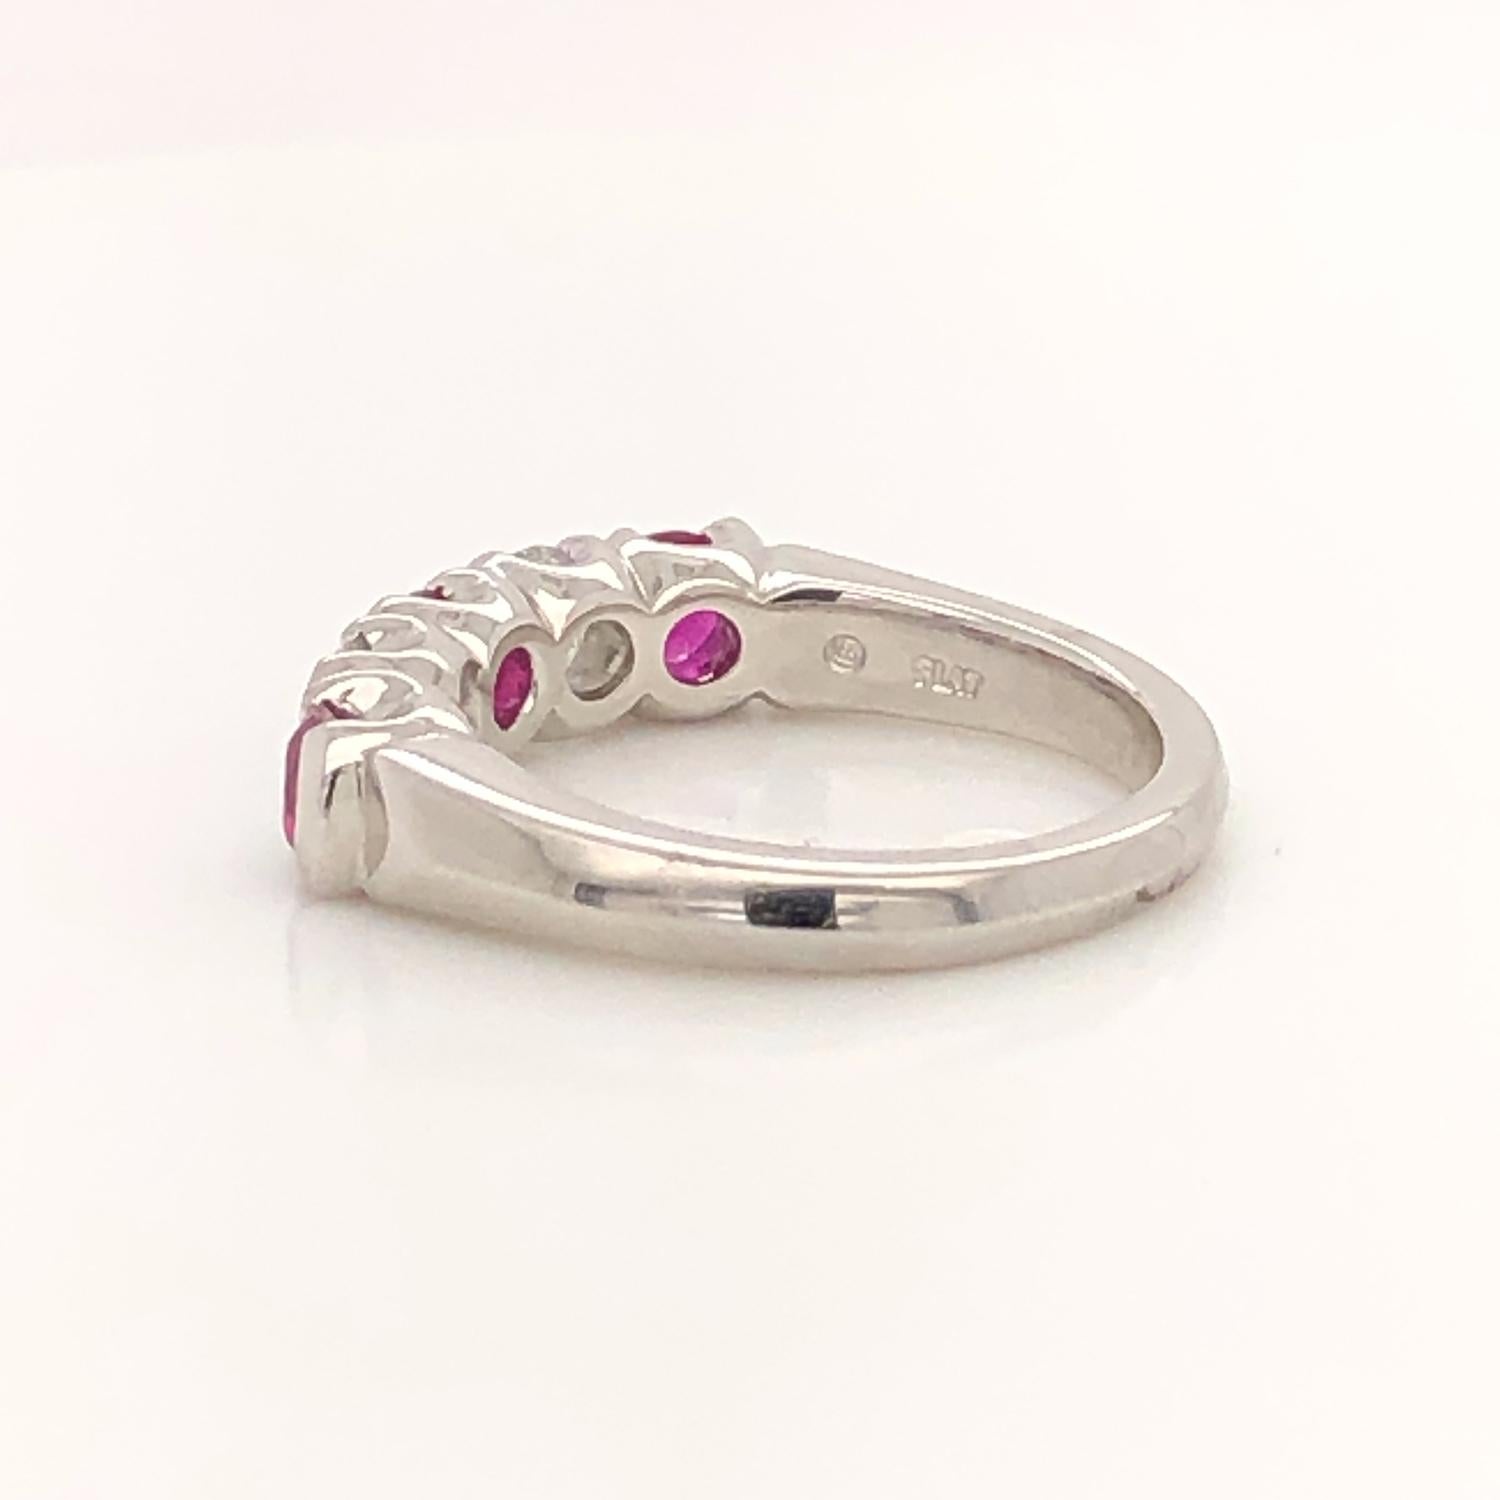 Oscar Heyman platinum ruby and diamond partway wedding band ring contains 2 Round Diamonds (F-G/ VS+ quality) weighing 0.60cts and 3 Round Rubies weighing 0.87cts that are set with partway bezels. This style is very comfortable and secure on the